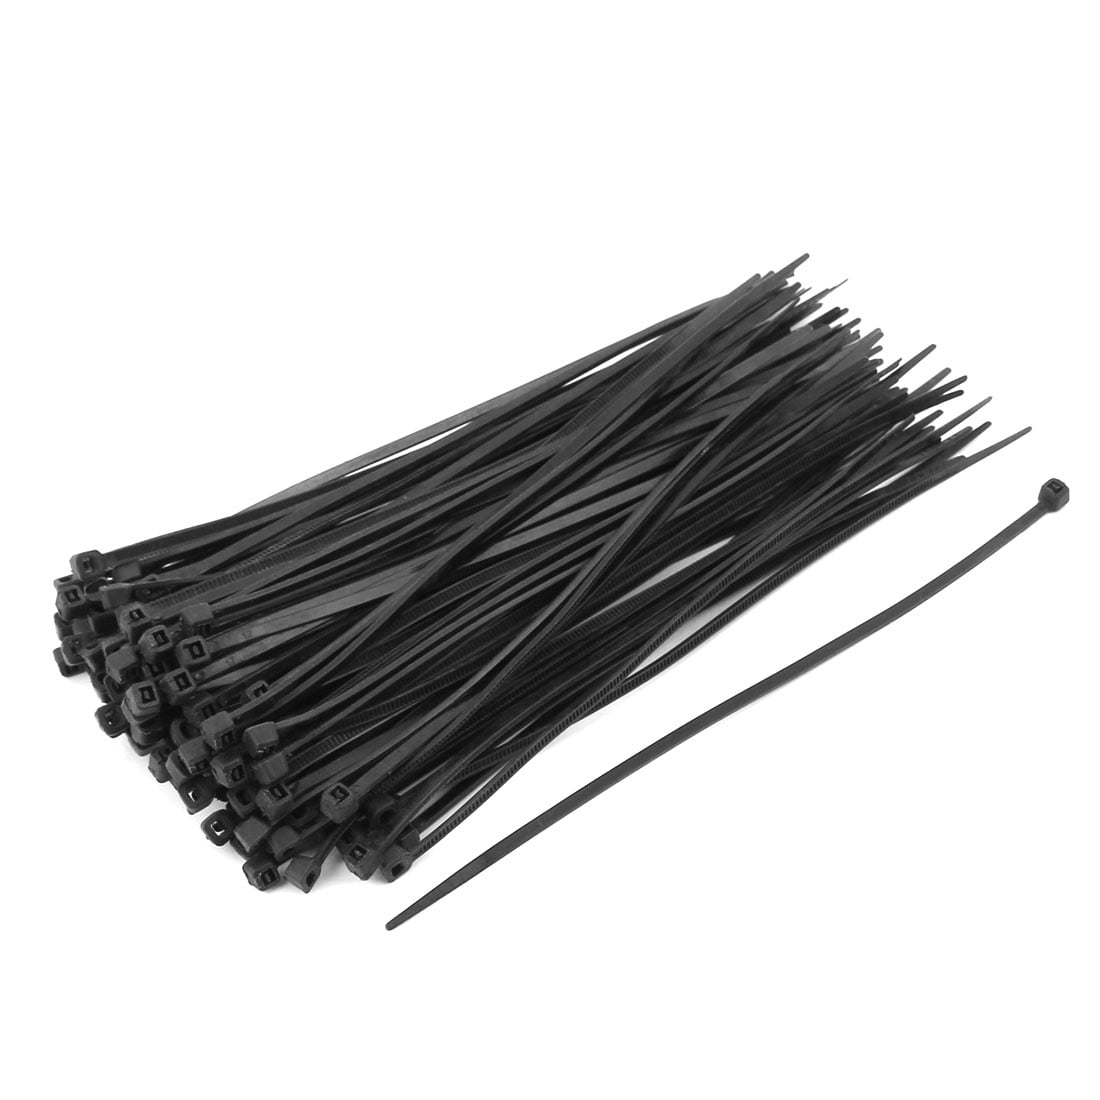 Cable Ties Nylon Wrap Zip Ties Fastening Cables Wire Black White 